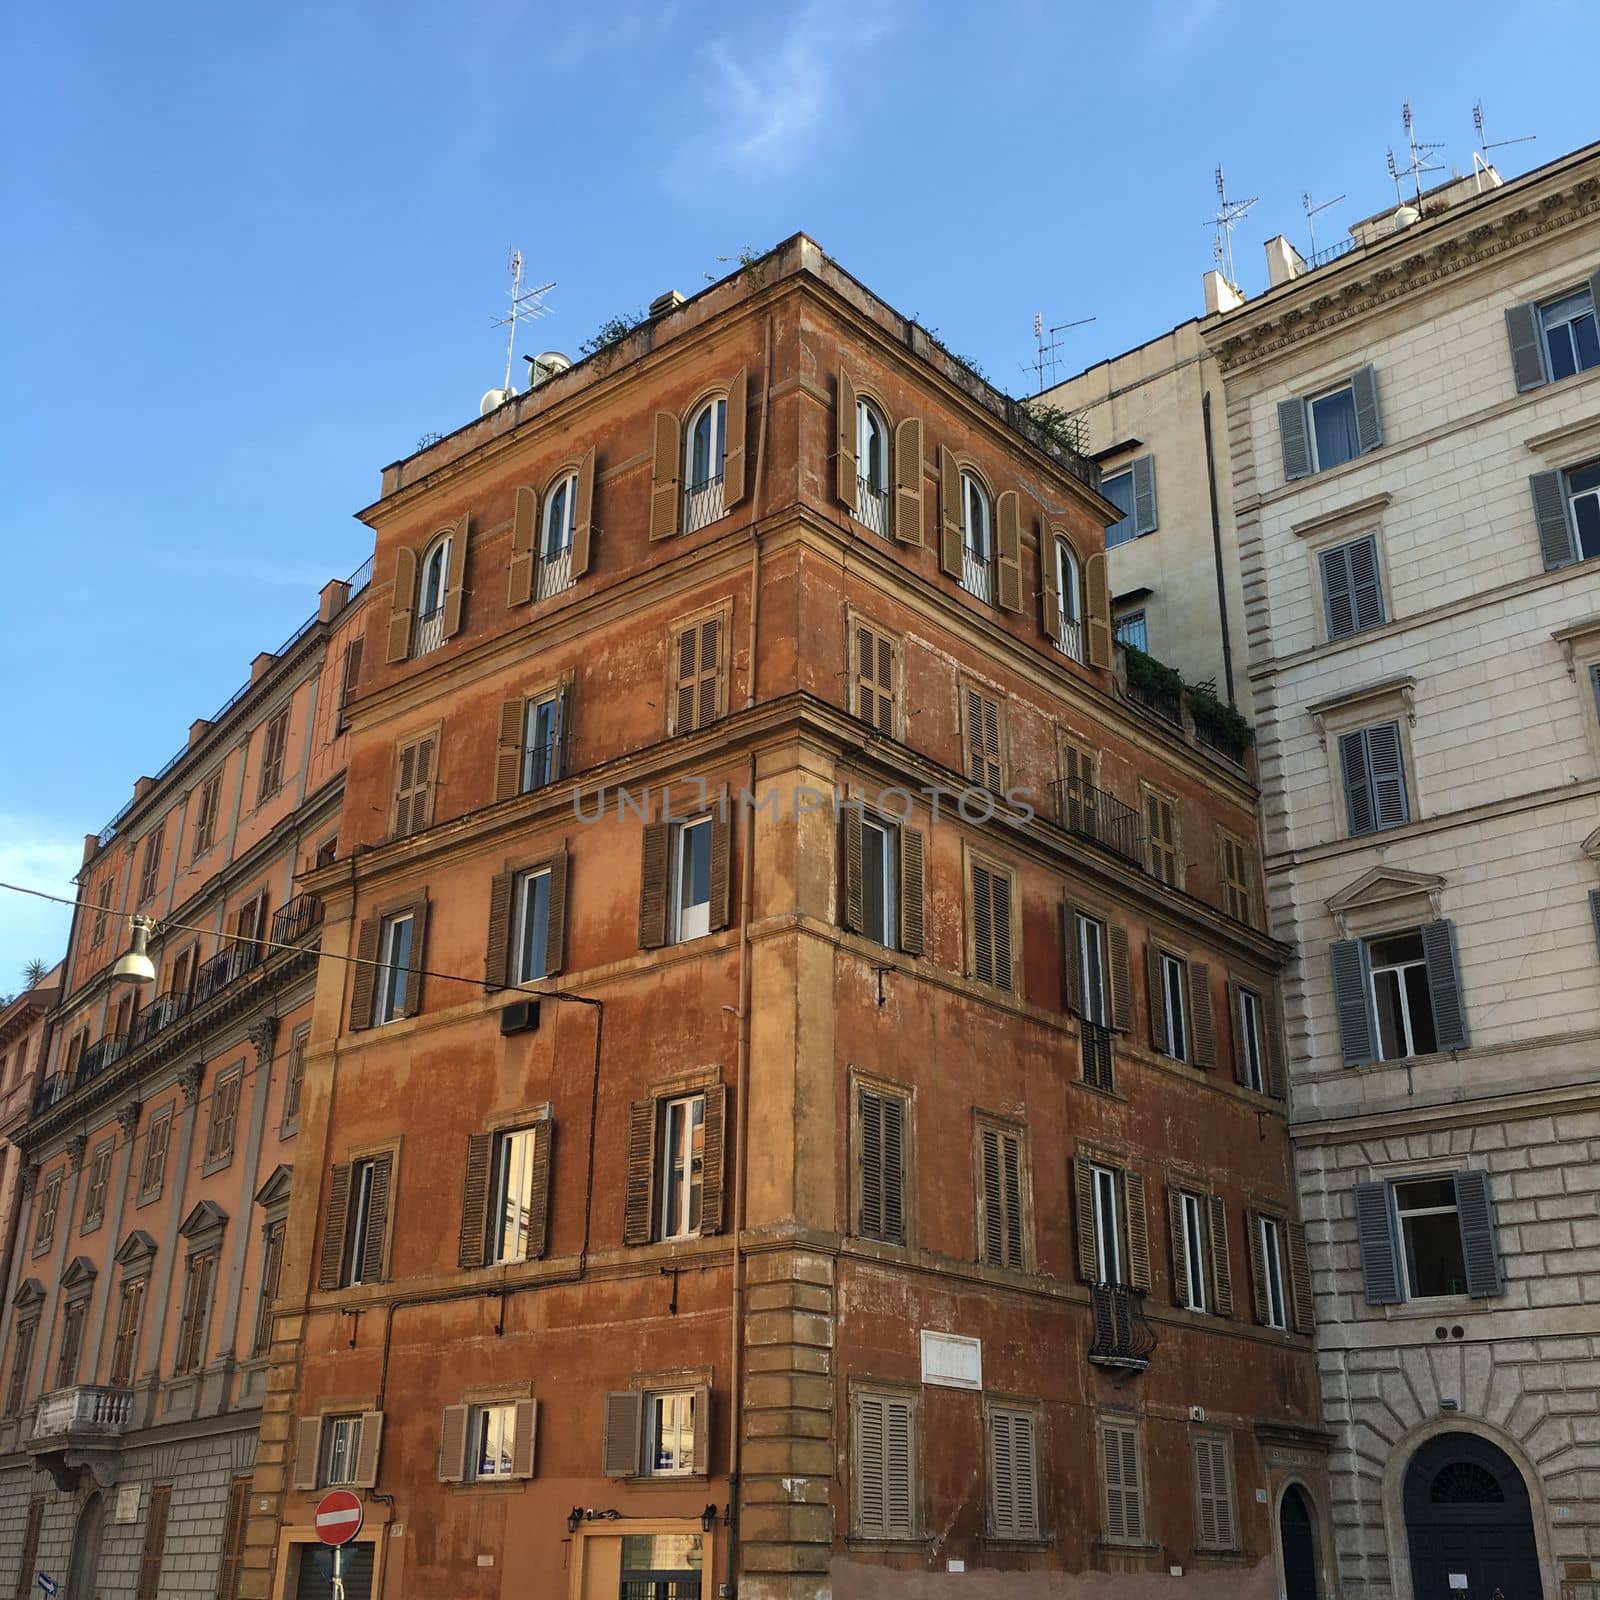 Buildings in the city streets of rome italy by WeWander